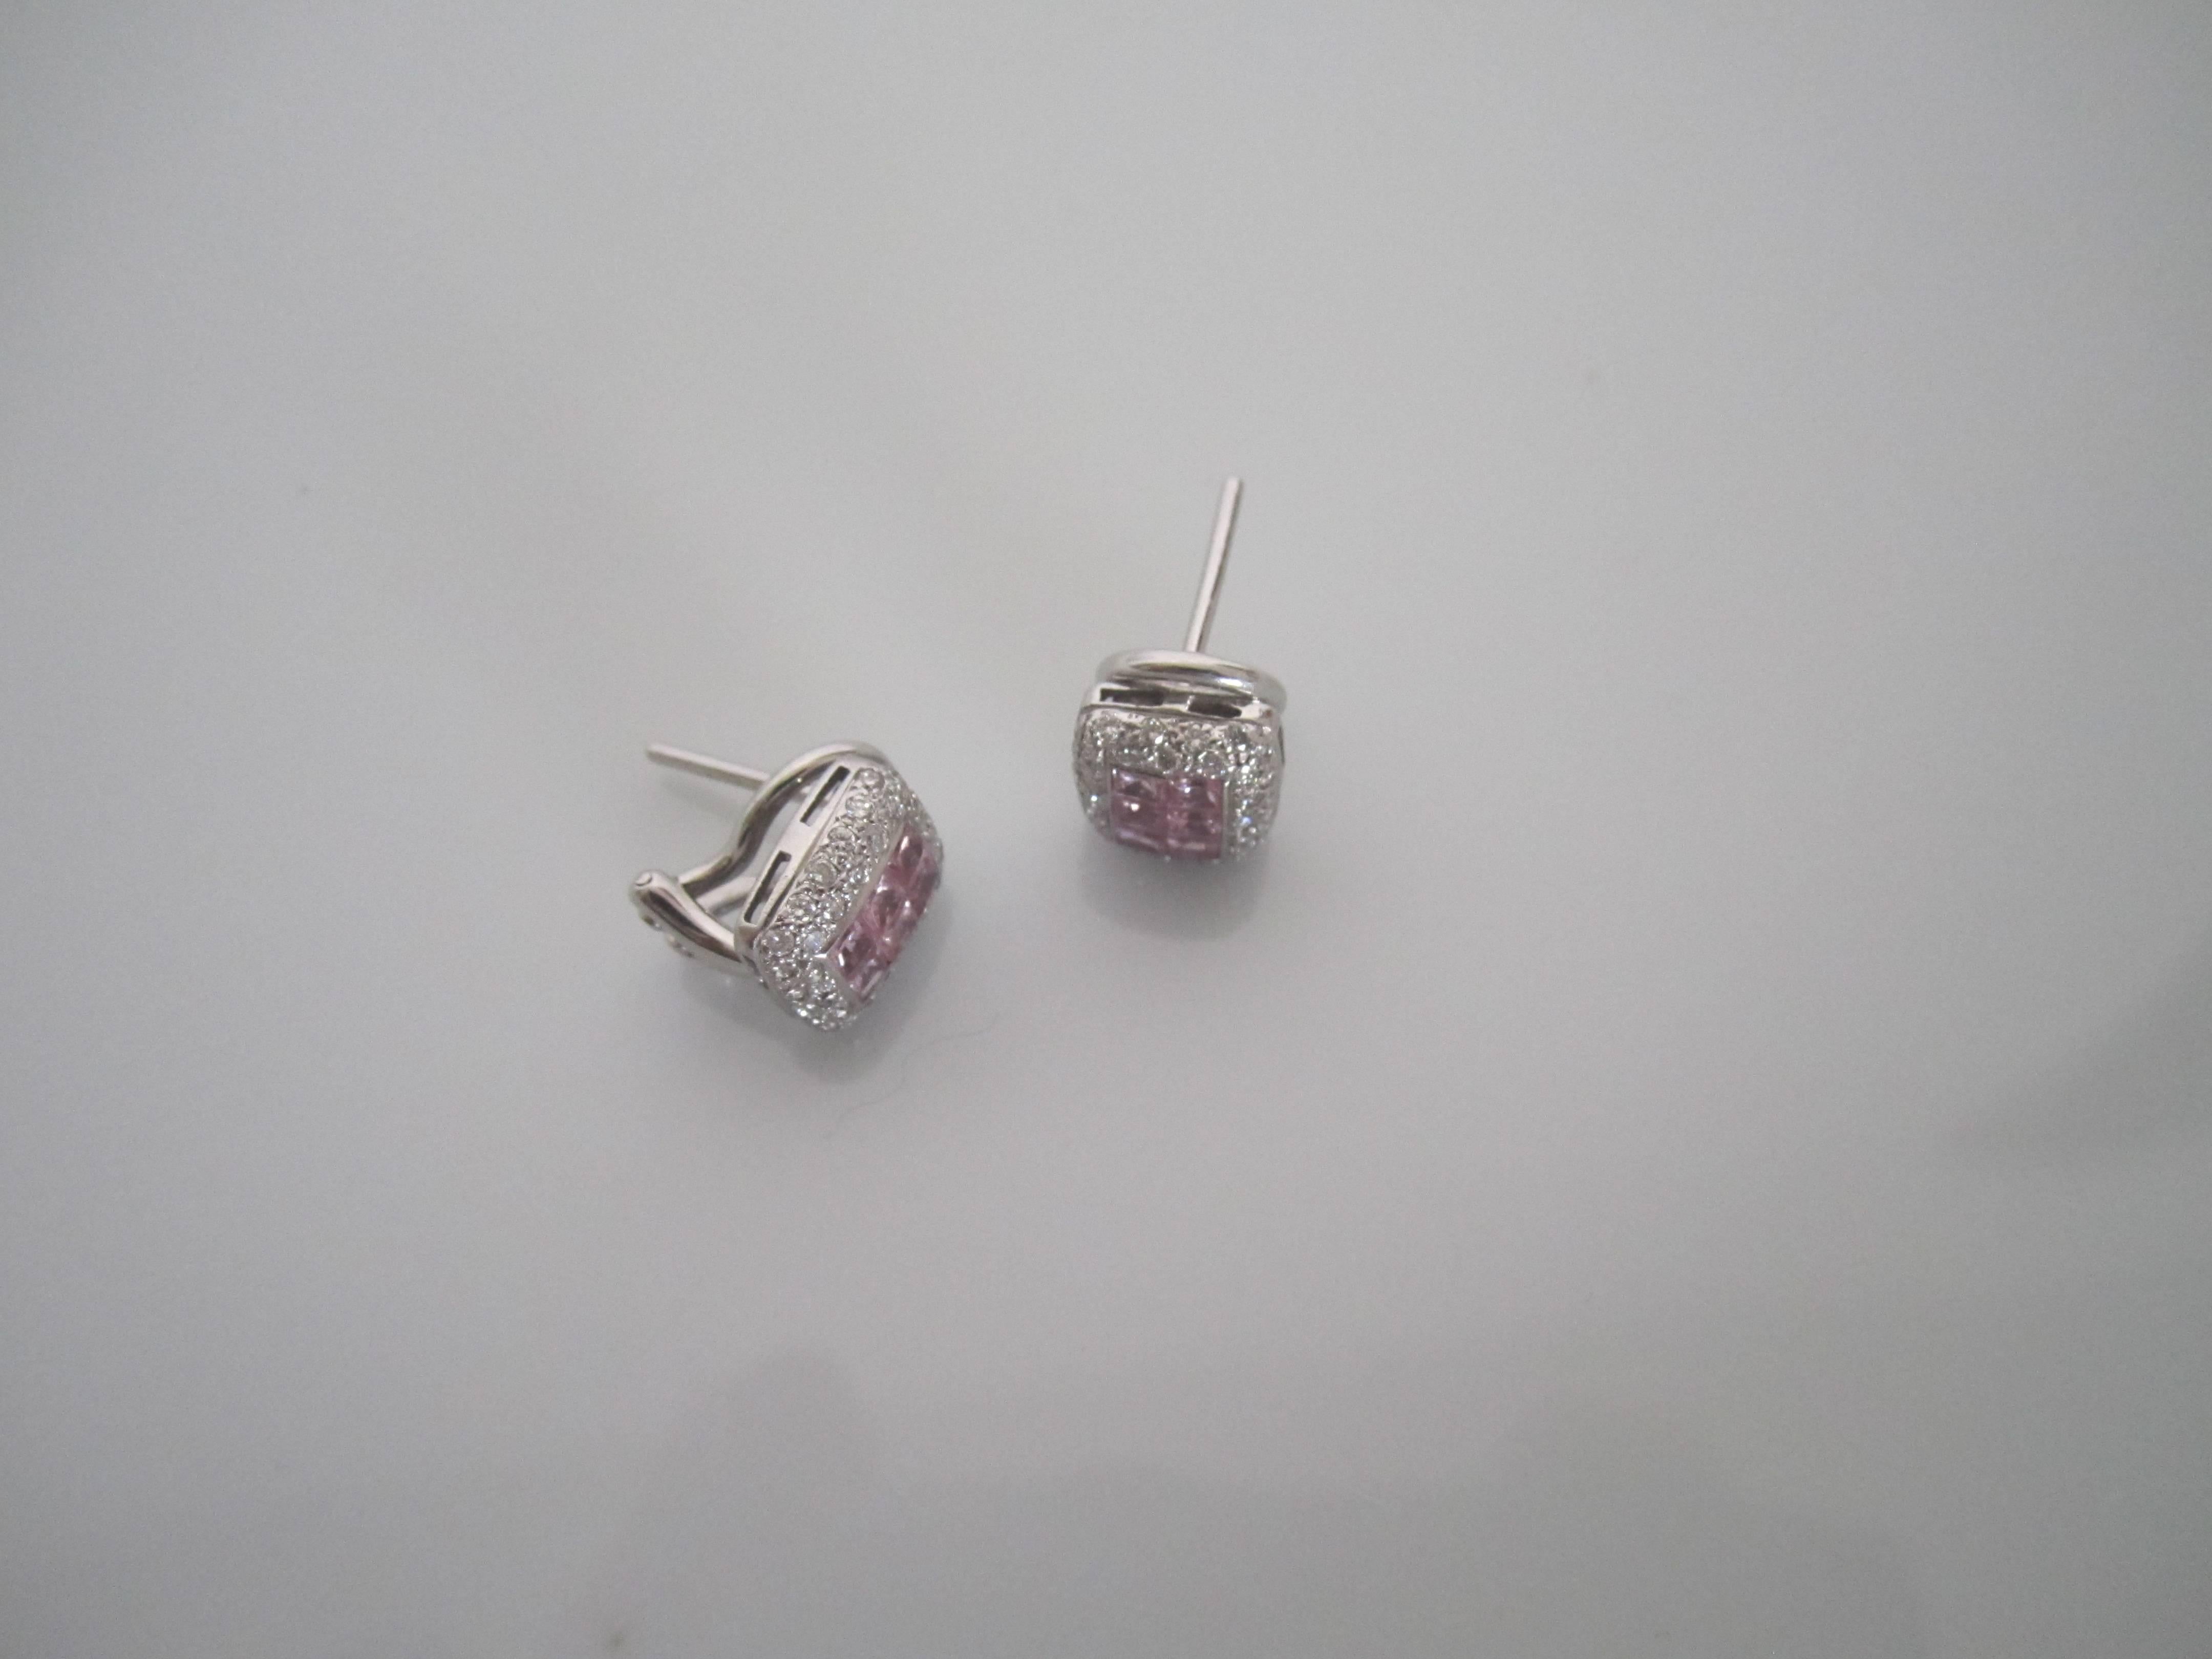 Unknown 18-Karat White Gold Pave Diamonds and Pink Sapphire Earrings